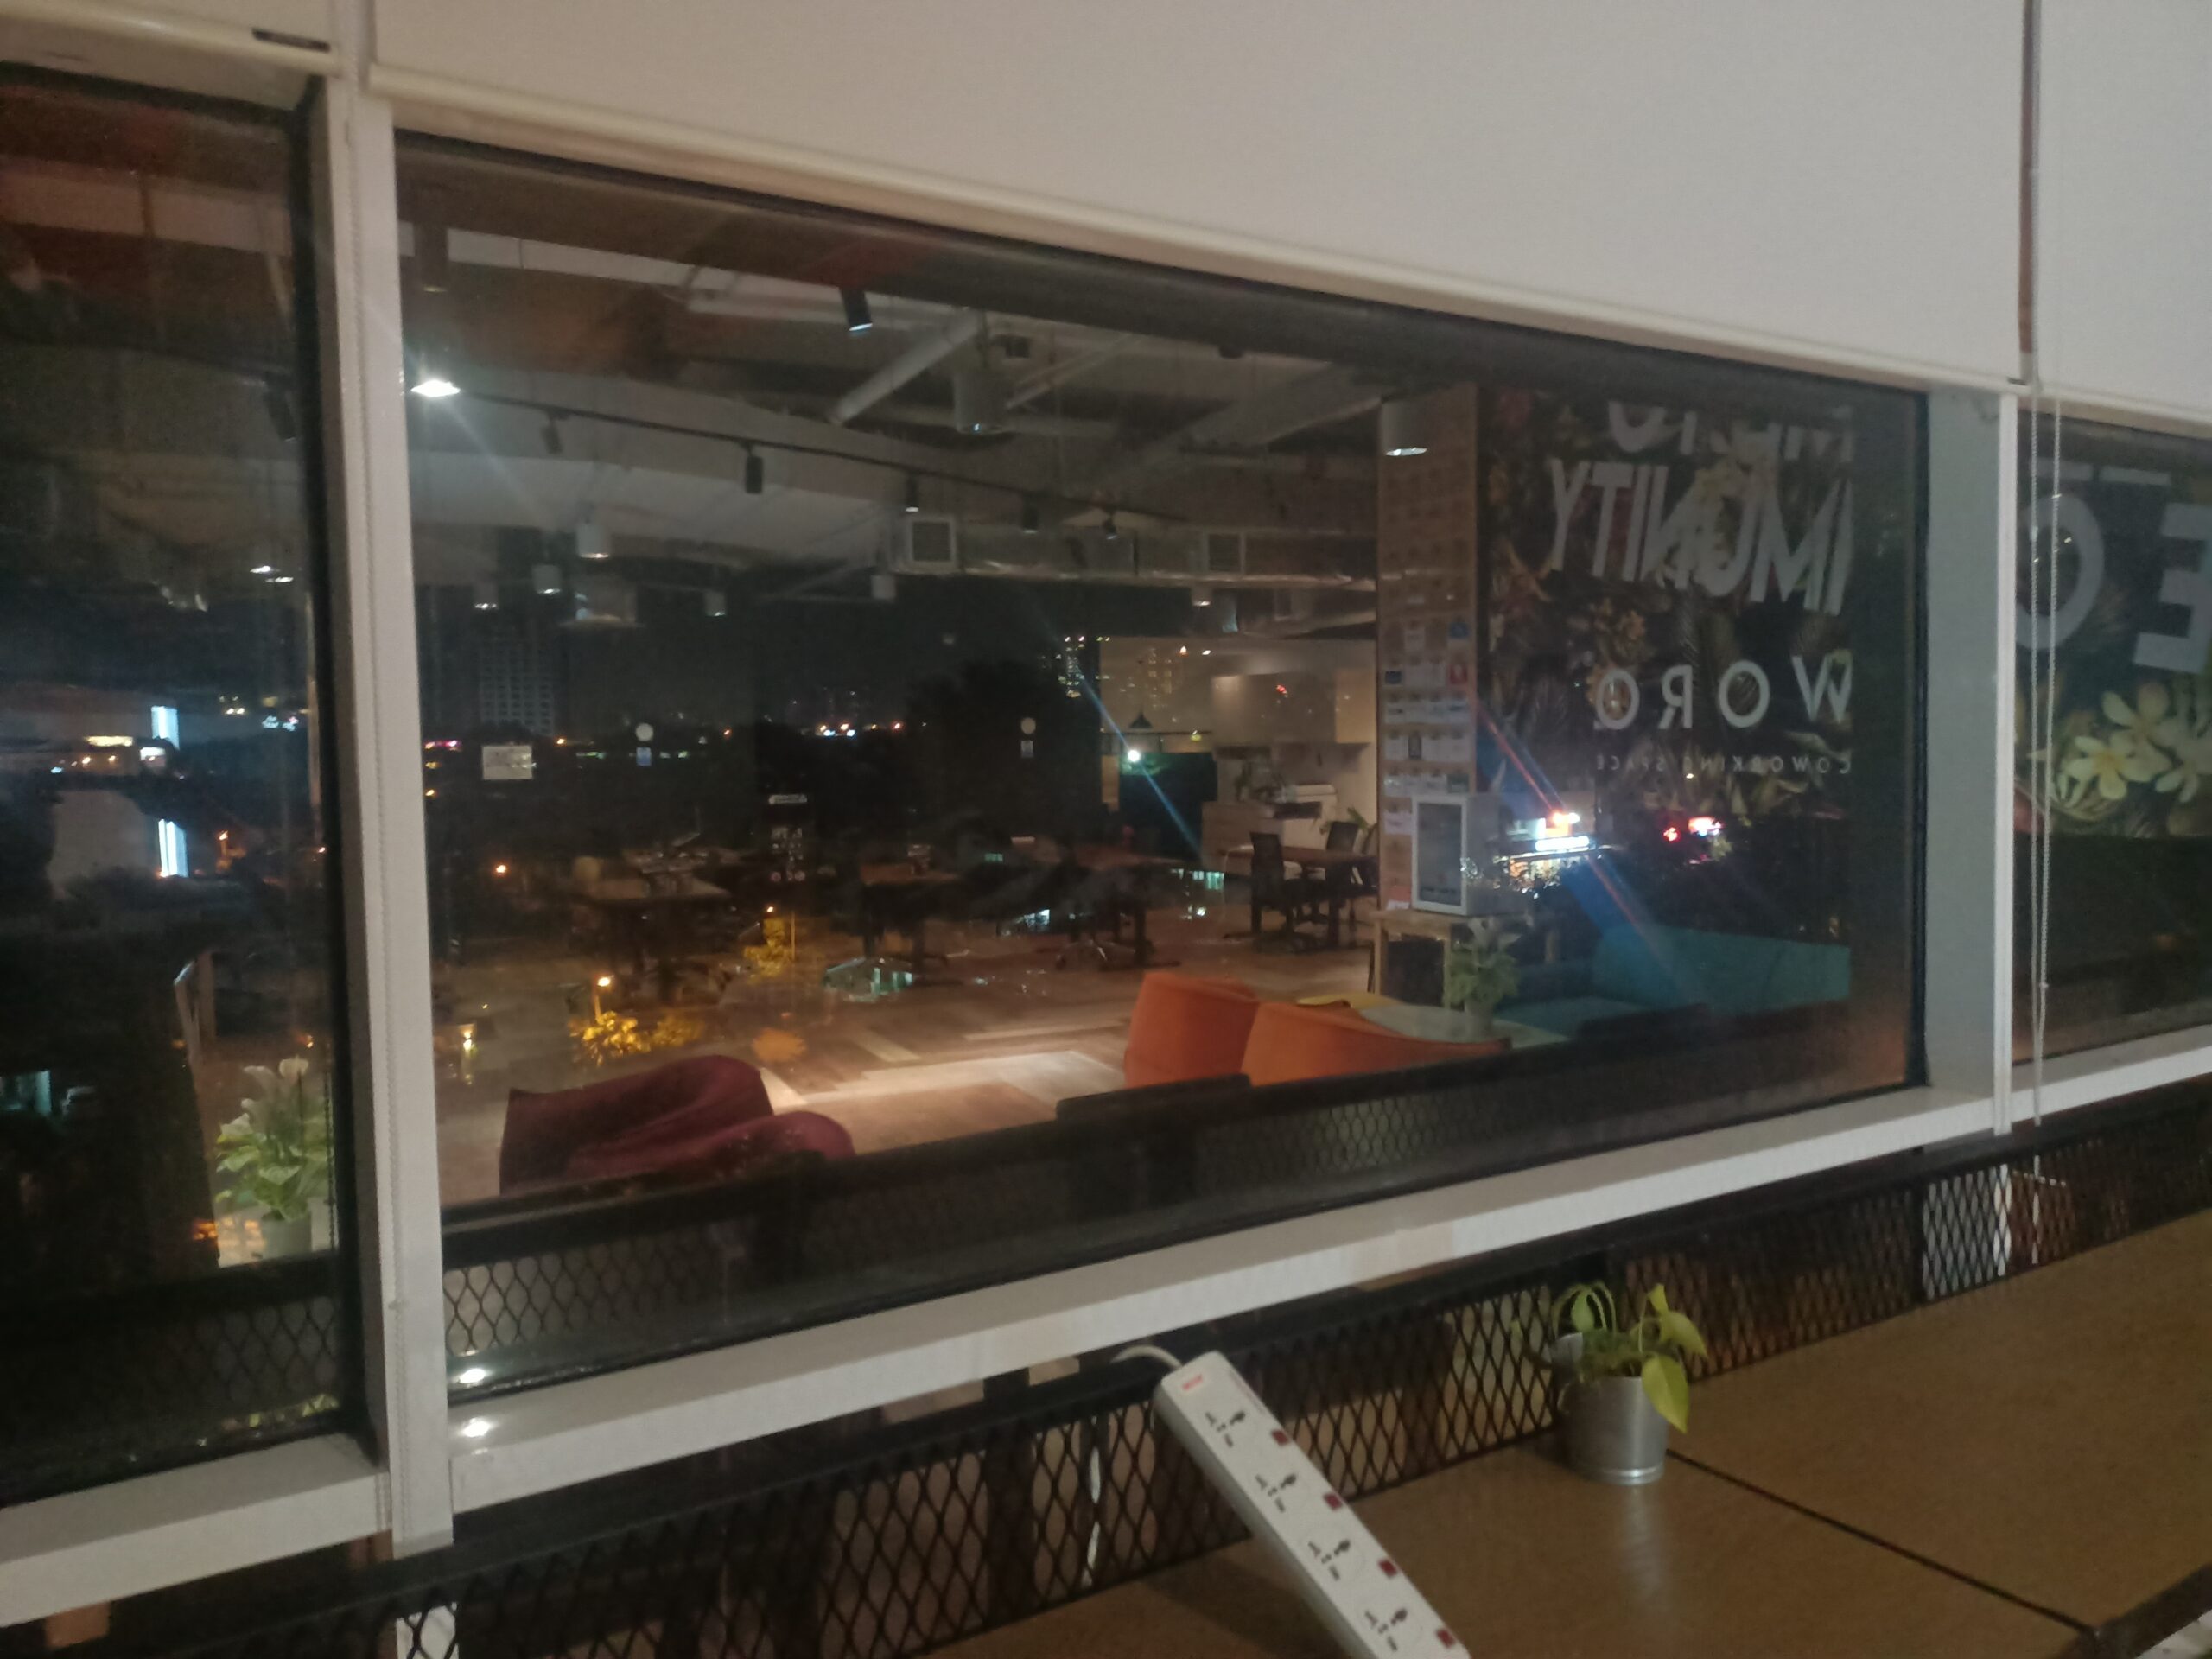 Soundproofed, double-glazed windows at night time in an office space.